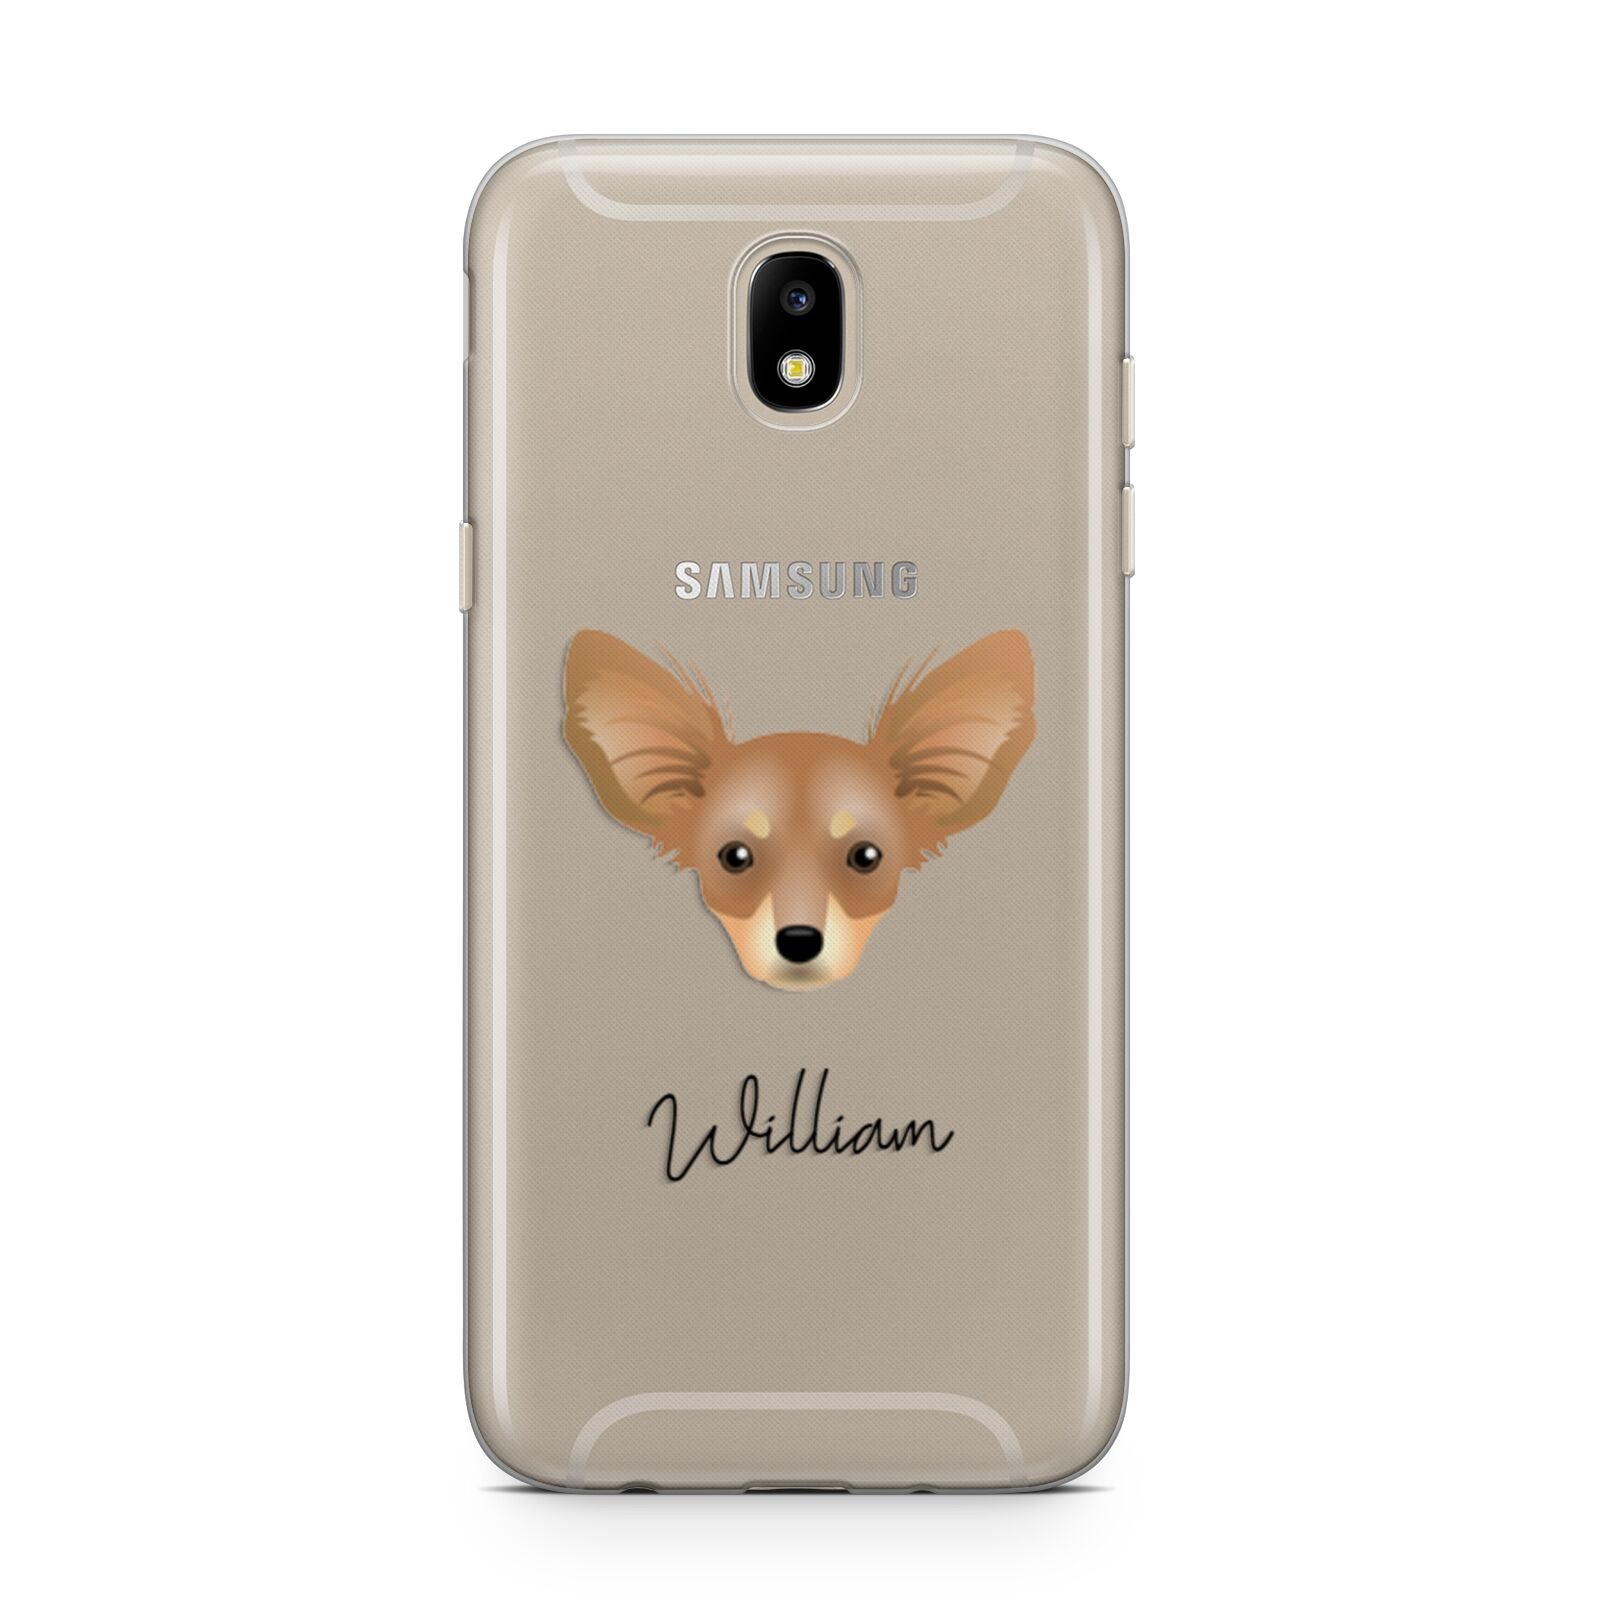 Russian Toy Personalised Samsung J5 2017 Case